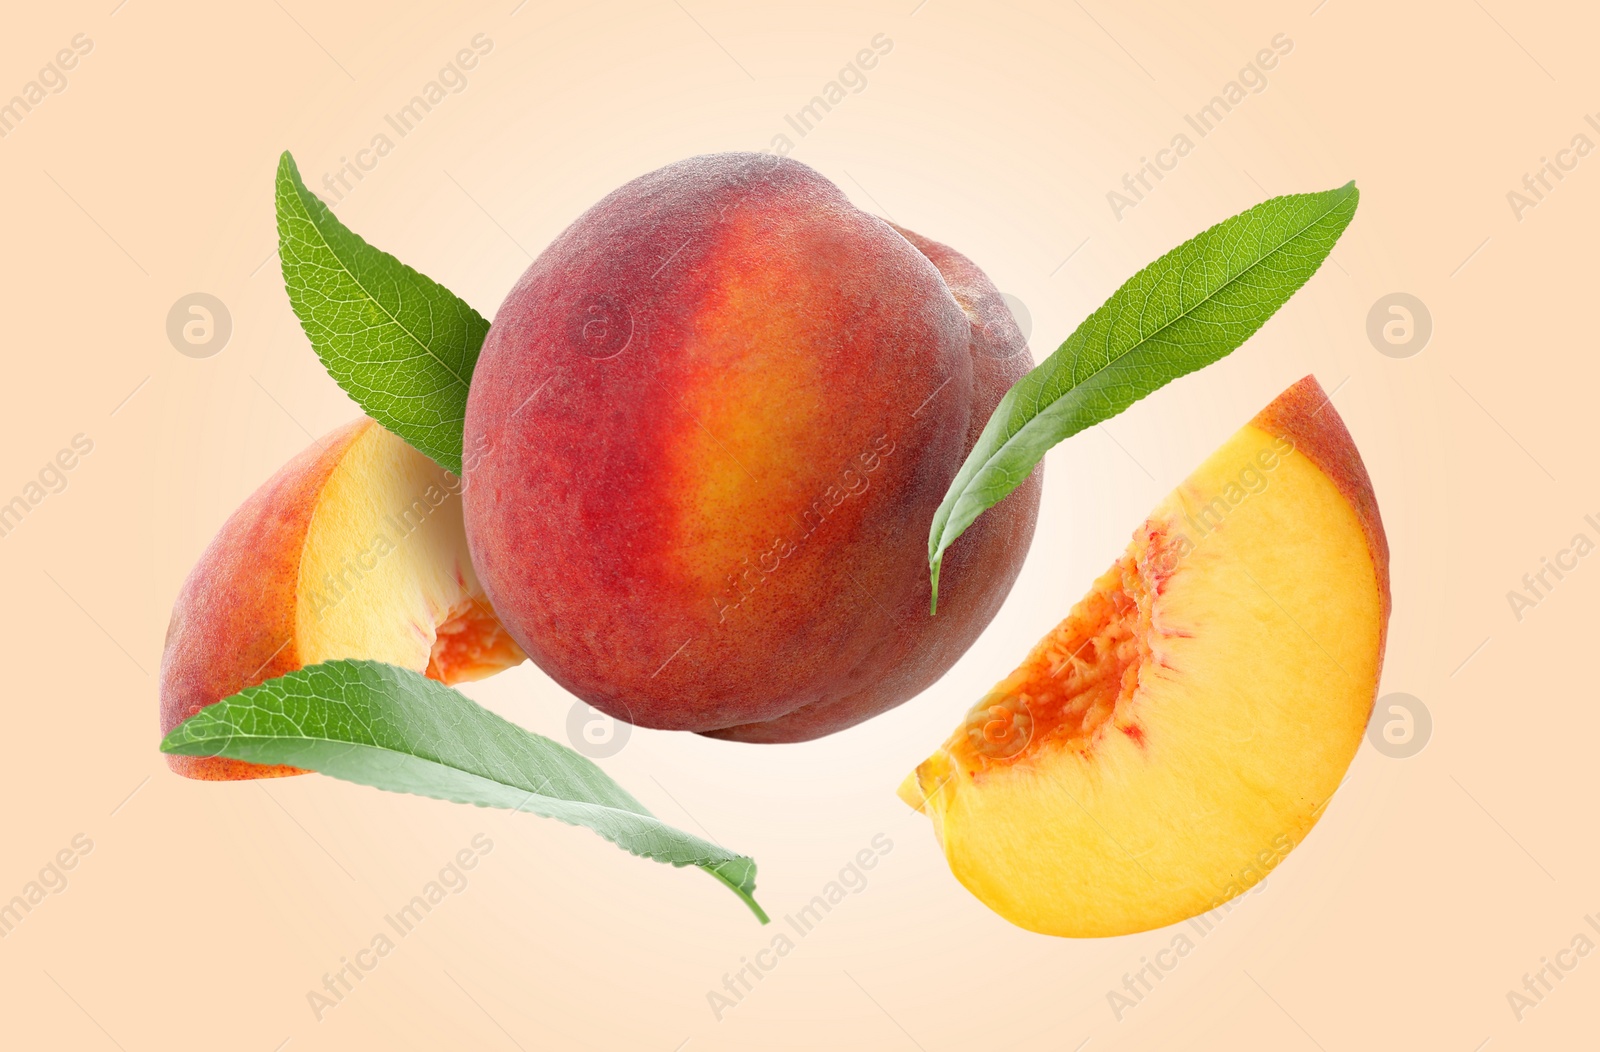 Image of Juicy fresh peaches with green leaves falling on pink beige background